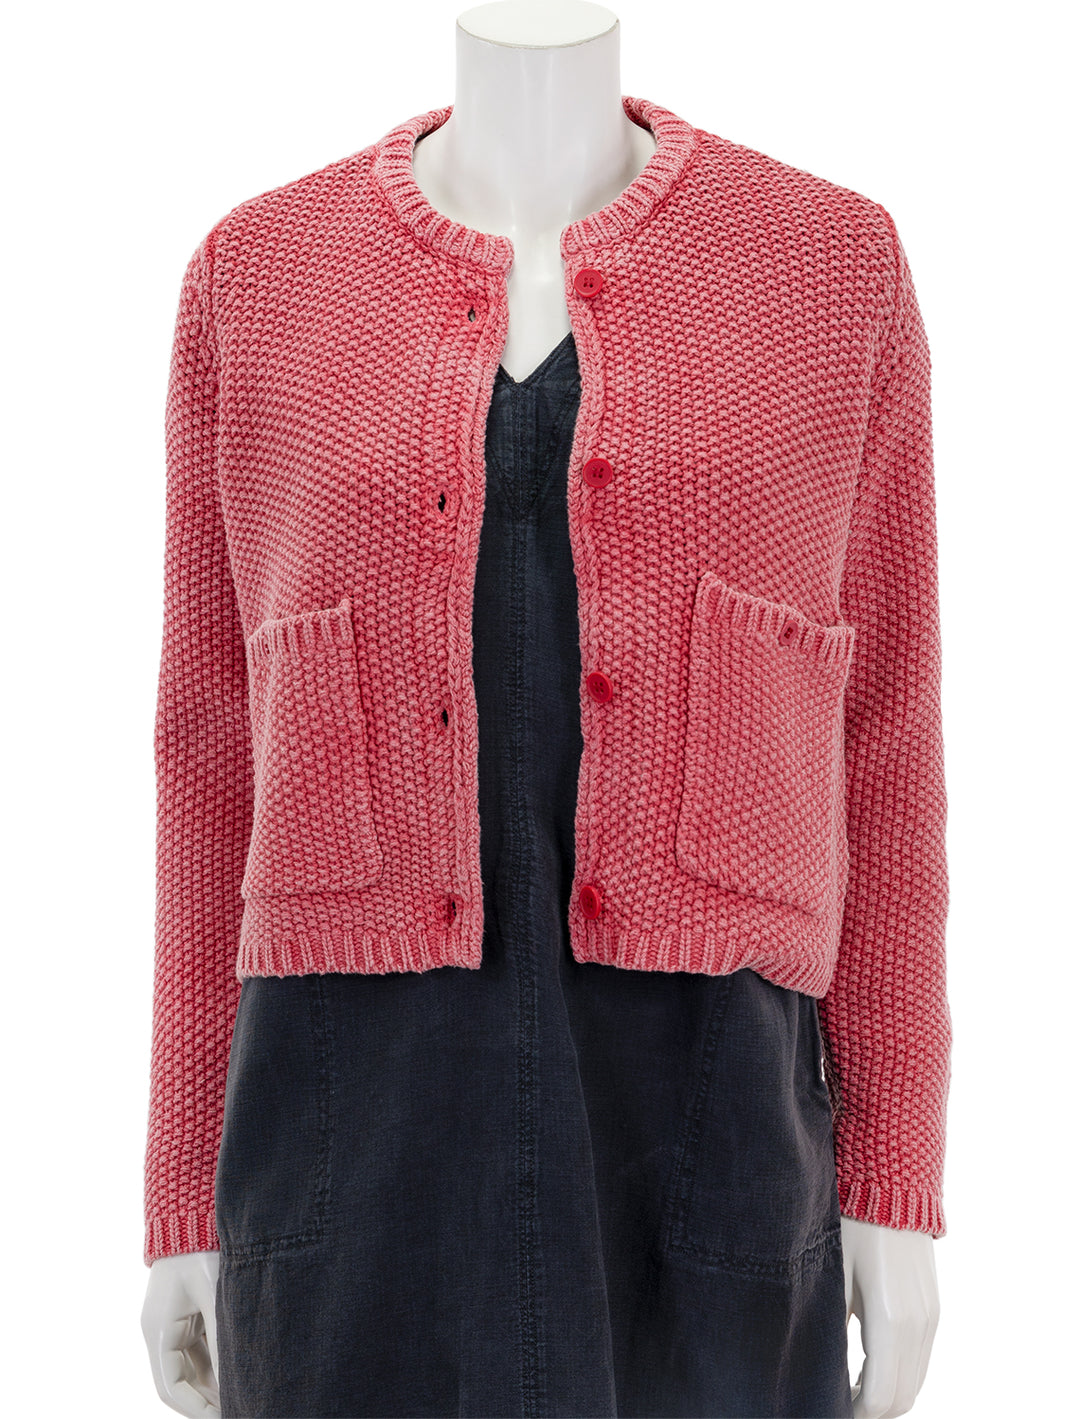 Front view of Splendid's andrea cropped cardigan in rossa.